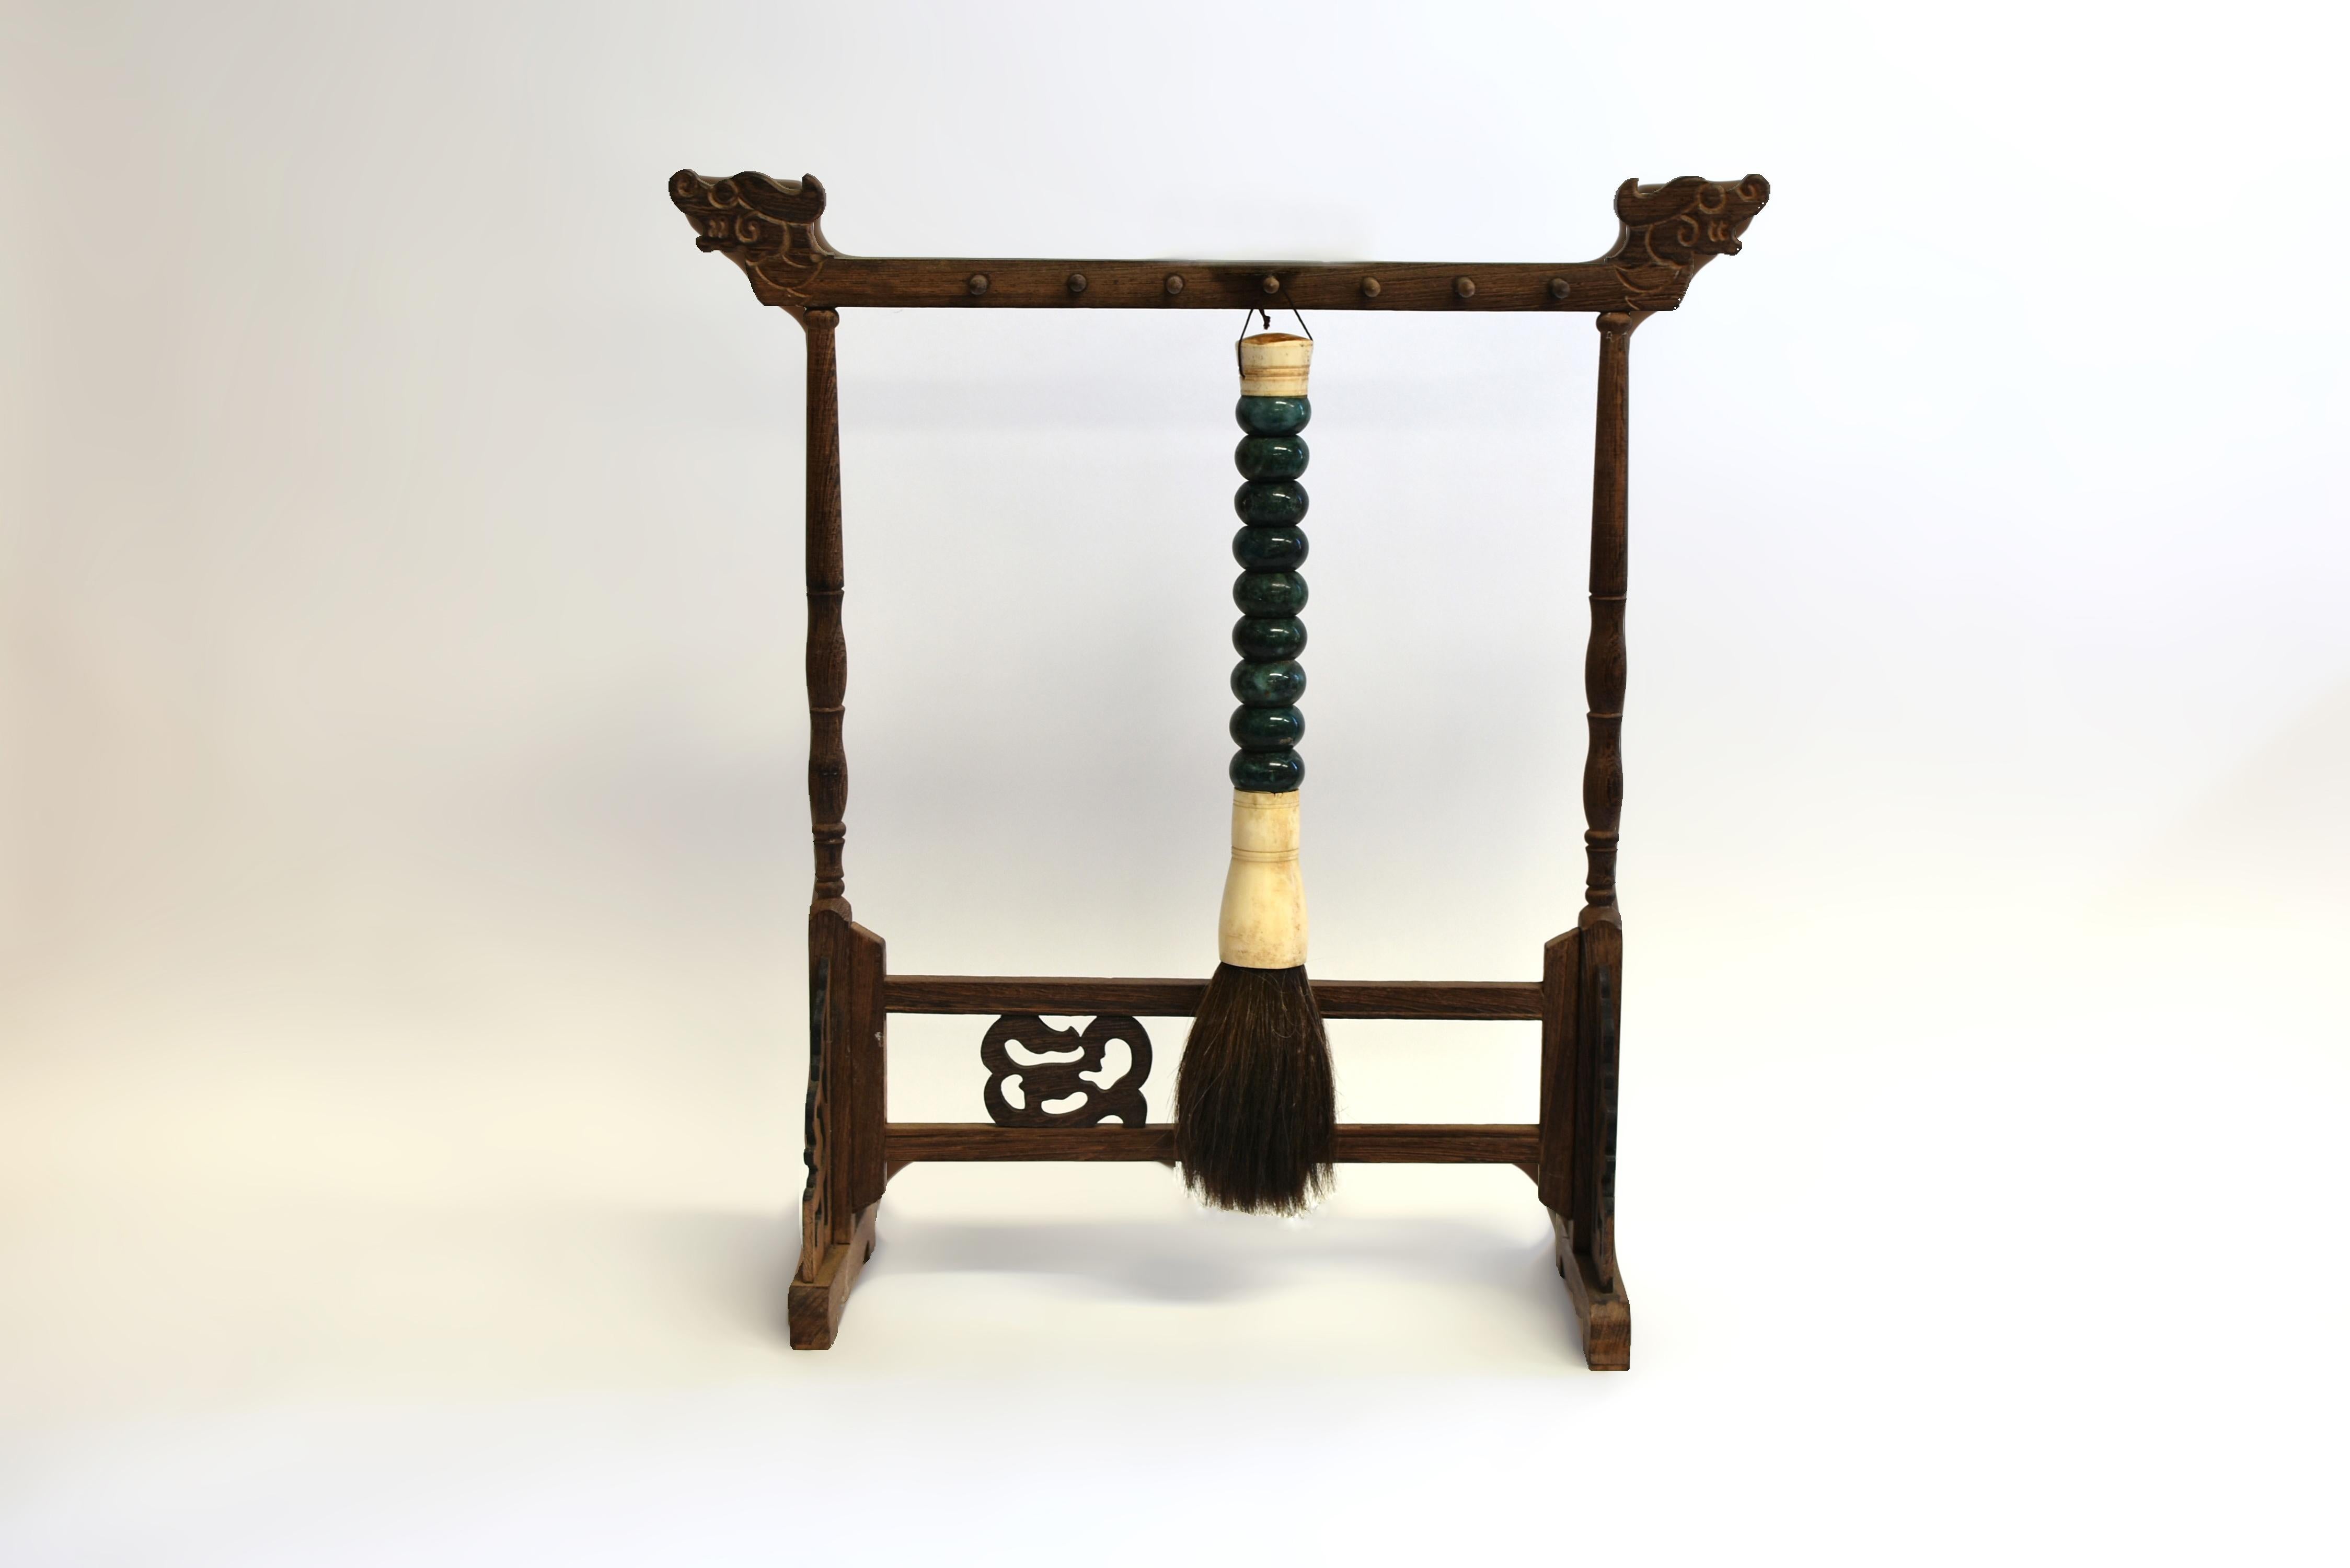 A beautiful large Chinese calligraphy brush with stunning green marble beads, natural cow bone ferrule and horse hair. This is a substantial 15